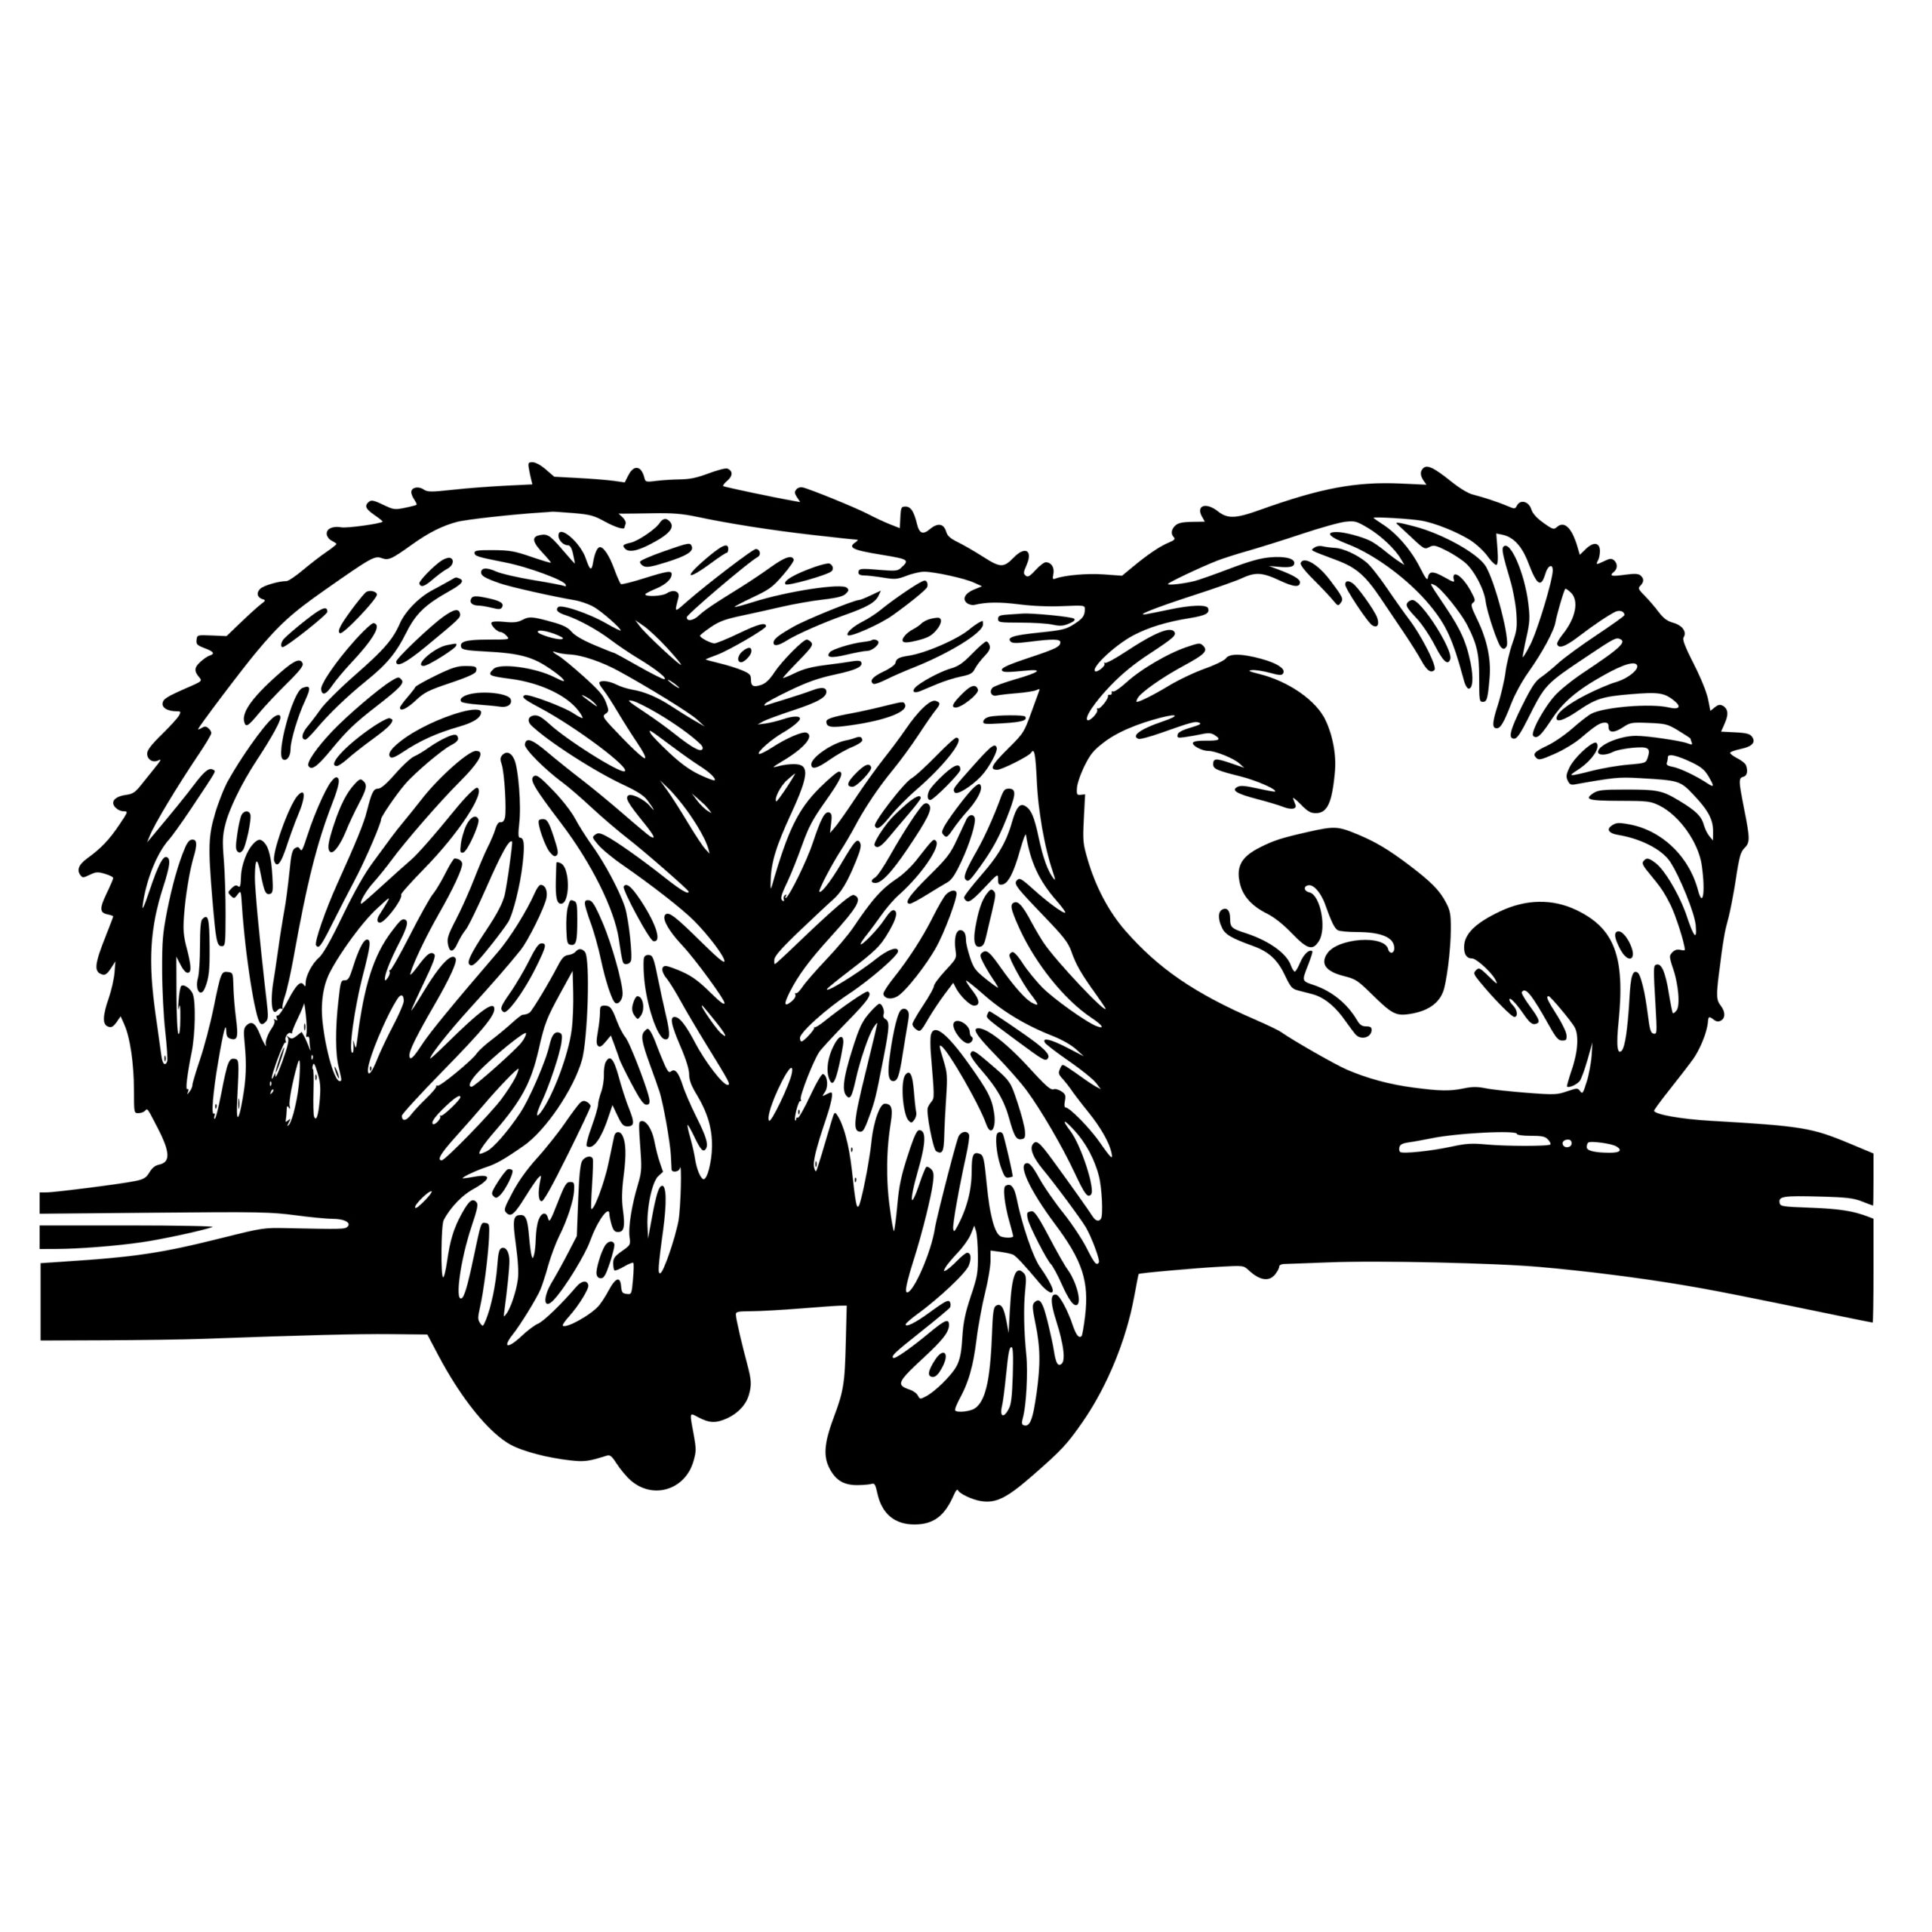 Sloth Sleeping SVG File for Cricut, Silhouette, Laser Machines